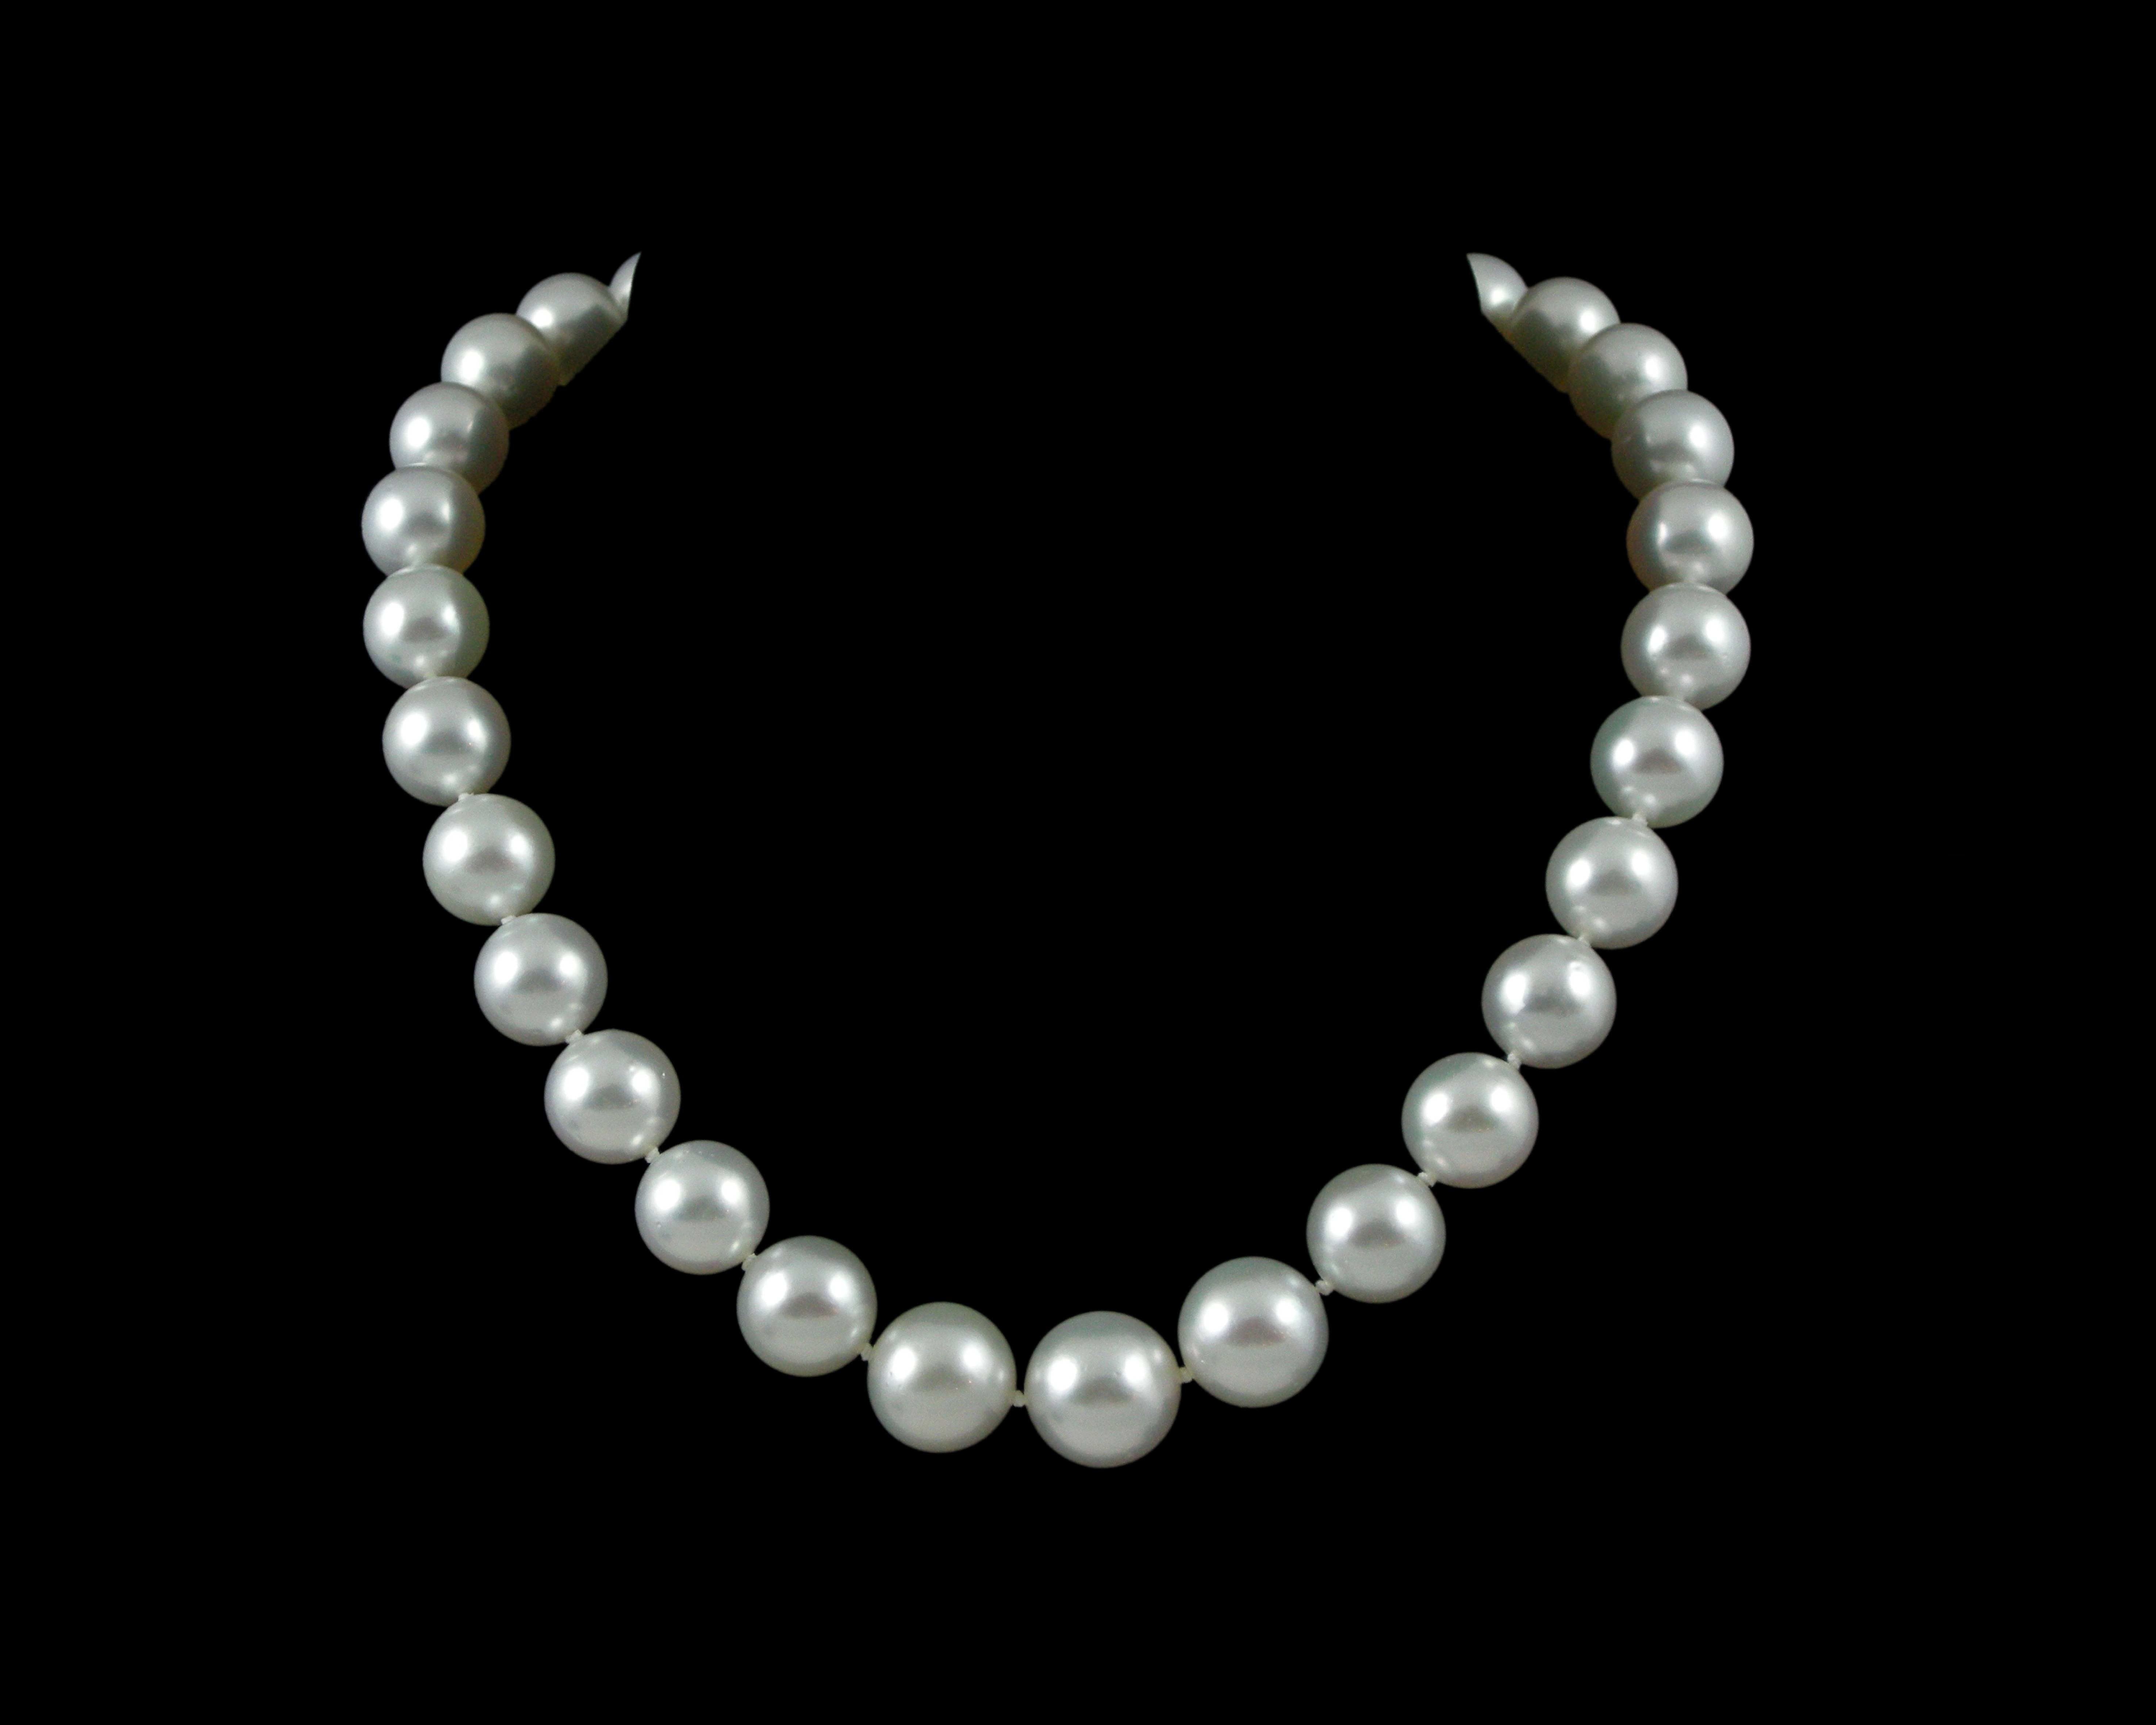 Bobbi Woods Black and White Photograph - Pearl Necklace